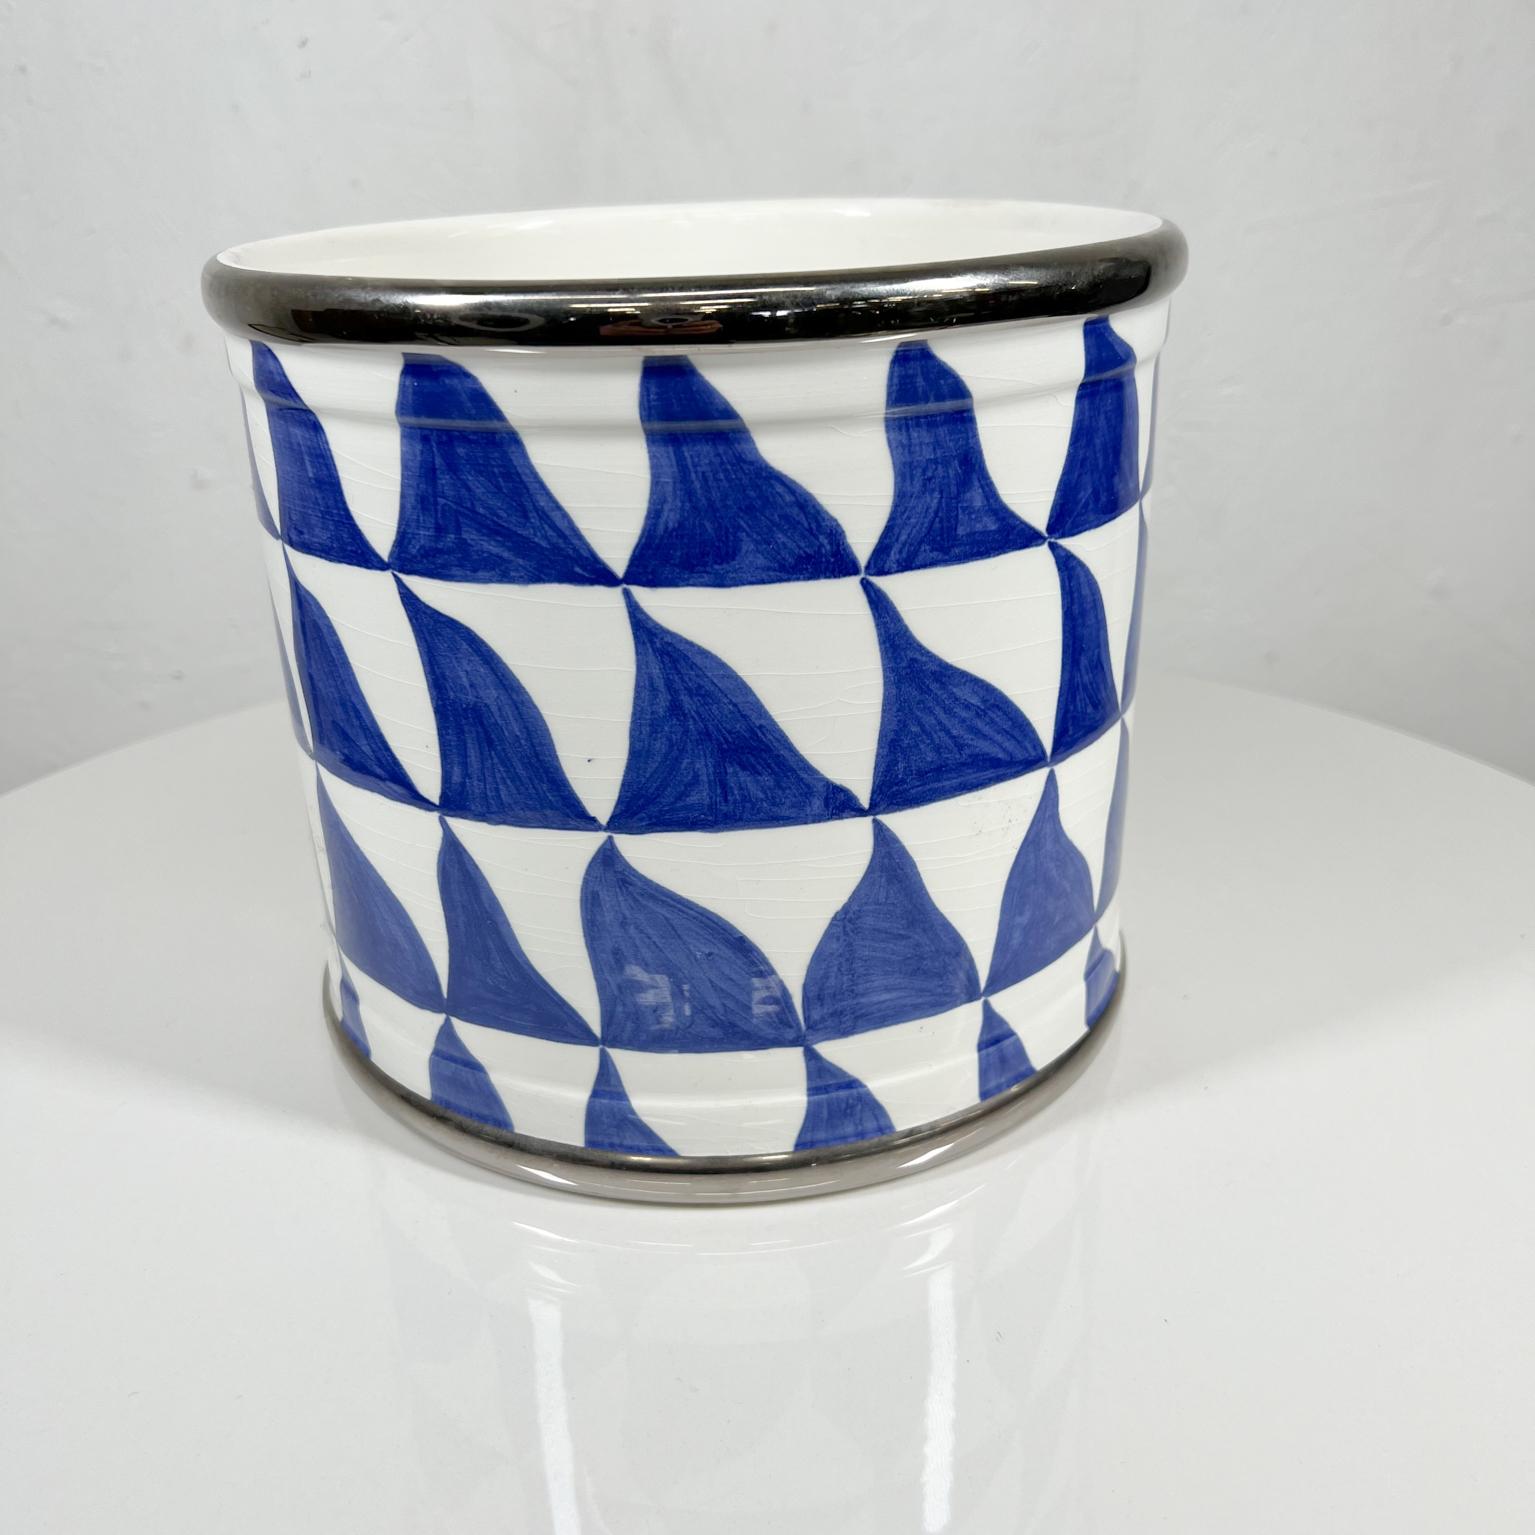 Made in Italy by Este Ceramiche for Tiffany white planter with blue and silver decoration.
1970s Geometric planter pot by Tiffany & Co Este Ceramiche ITALY.
Measure: 7.75 tall x 8.5 
Preowned original vintage condition.
See images provided.
 